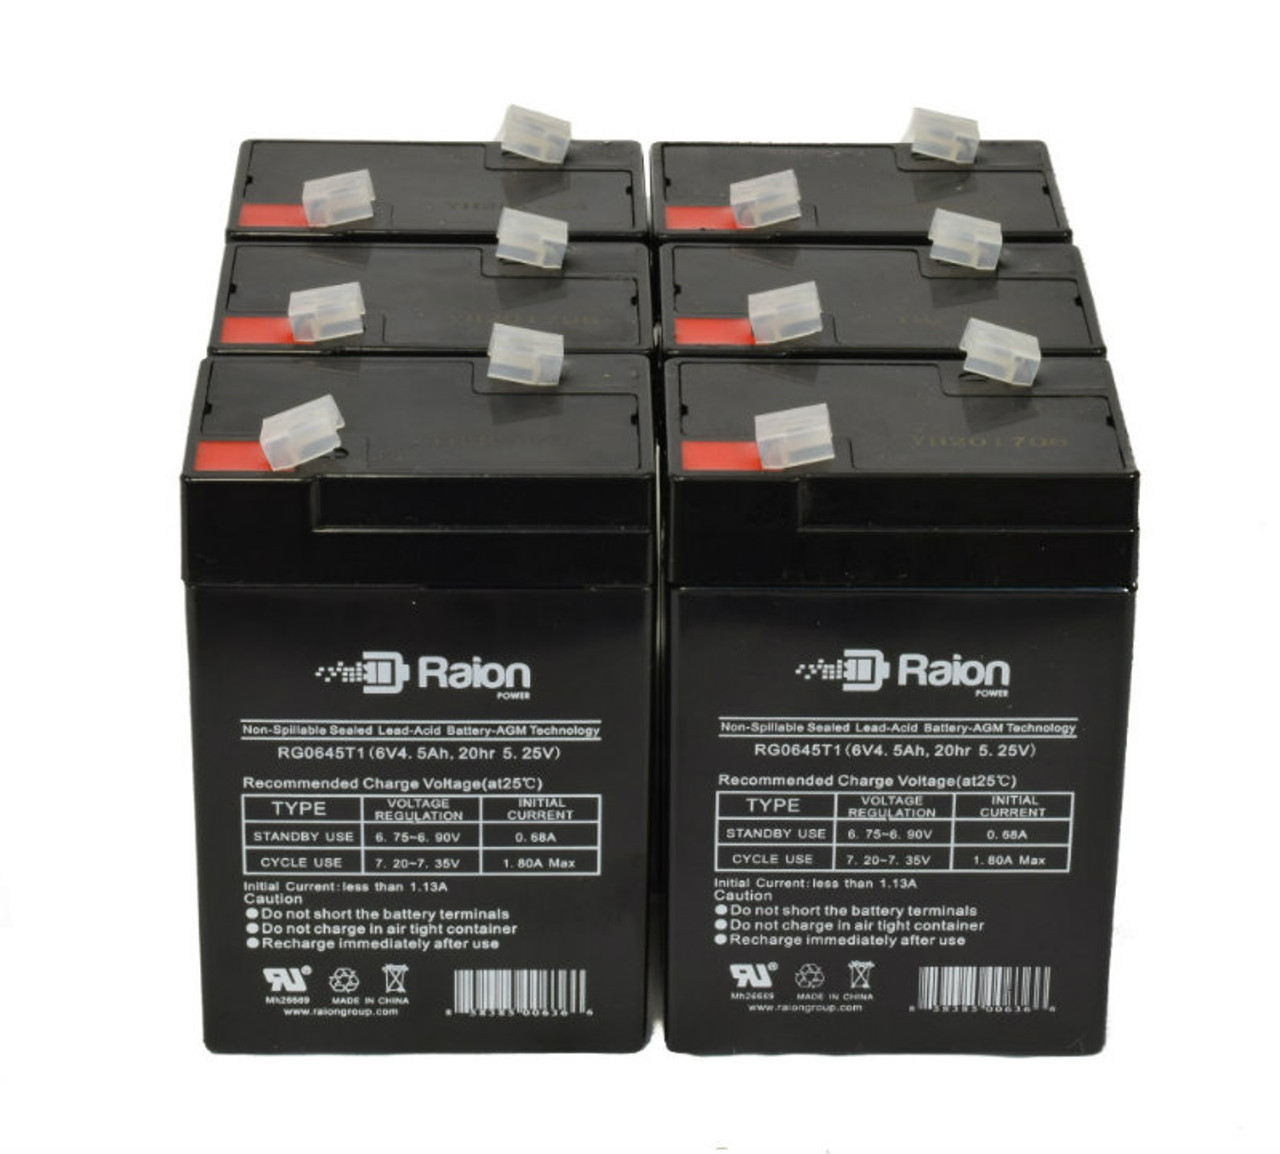 Raion Power 6 Volt 4.5Ah RG0645T1 Replacement Battery for Nair NR6-4.5S - 6 Pack